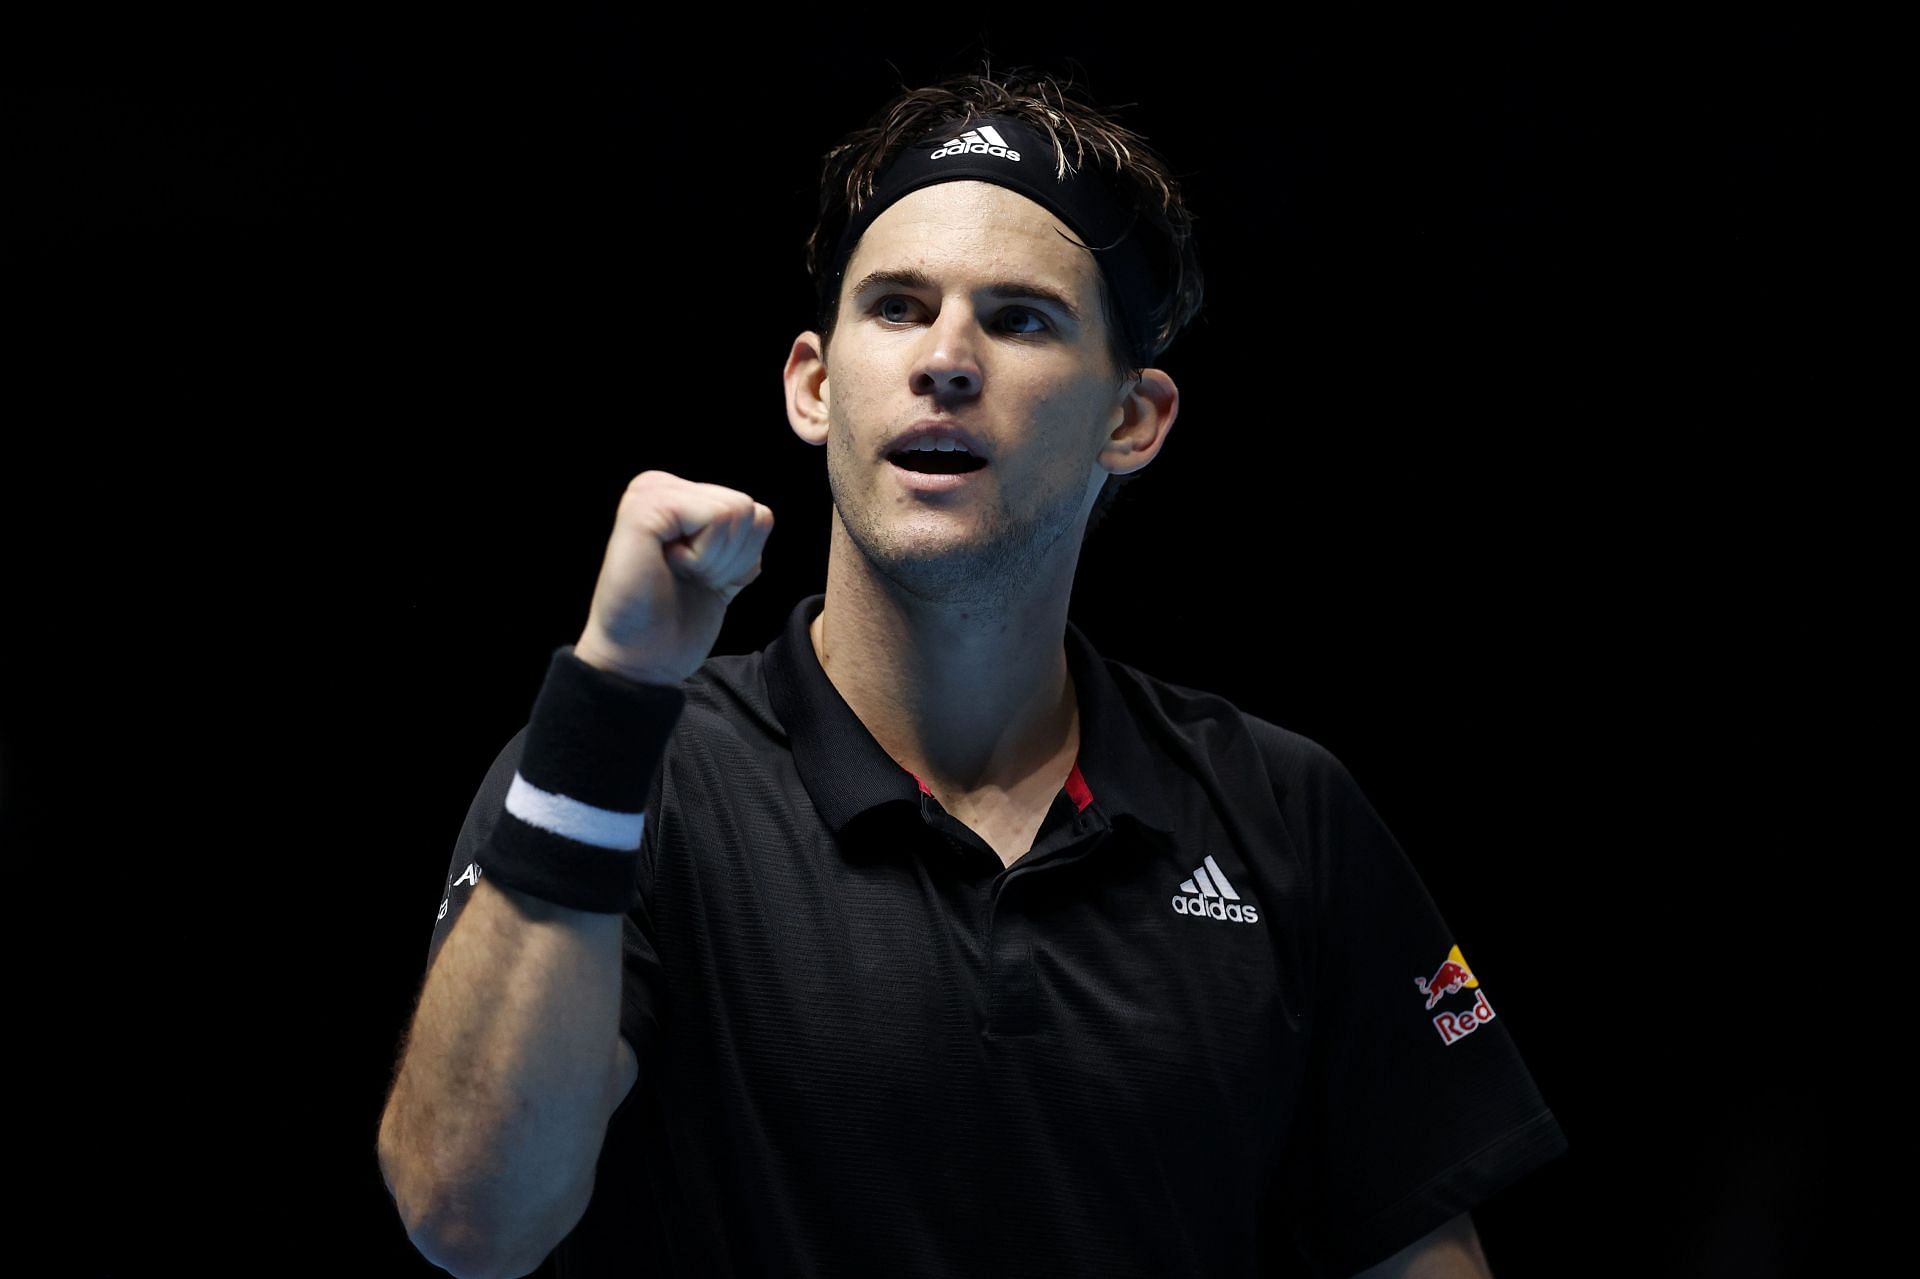 Dominic Thiem at the 2020 Nitto ATP World Tour Finals